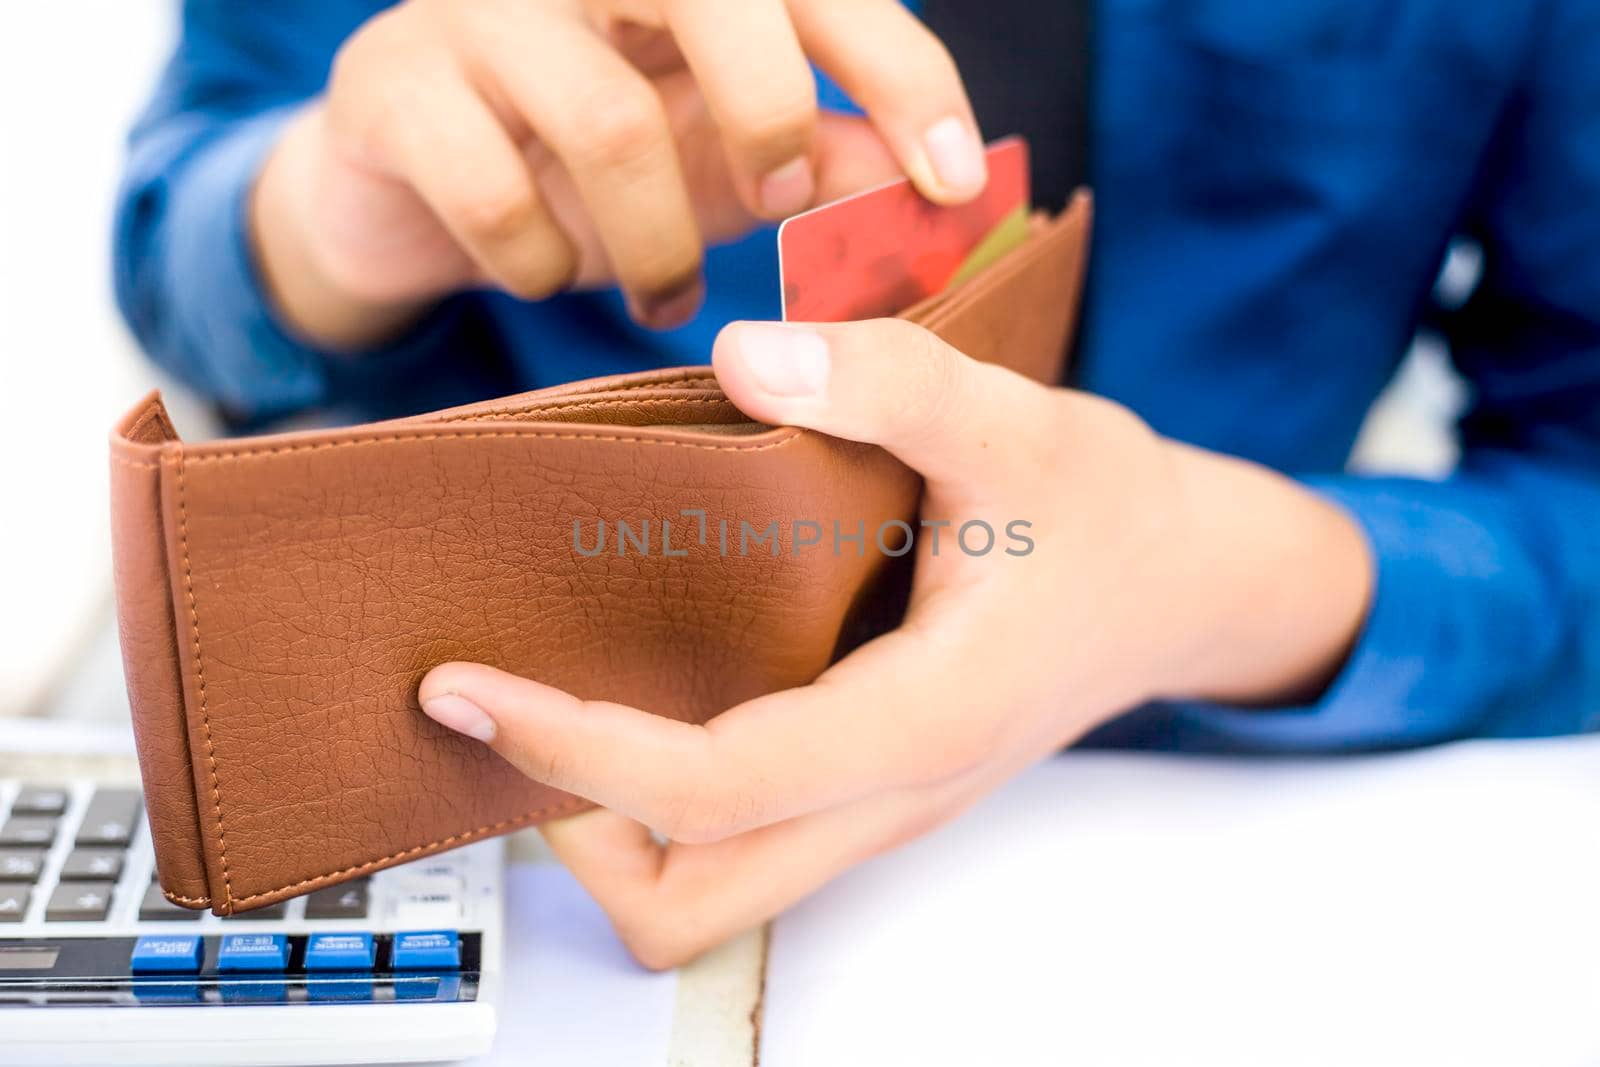 Businessman wearing a dark blue colored shirt with black tie and taking out his credit card from his brown colored wallet isolated on white.